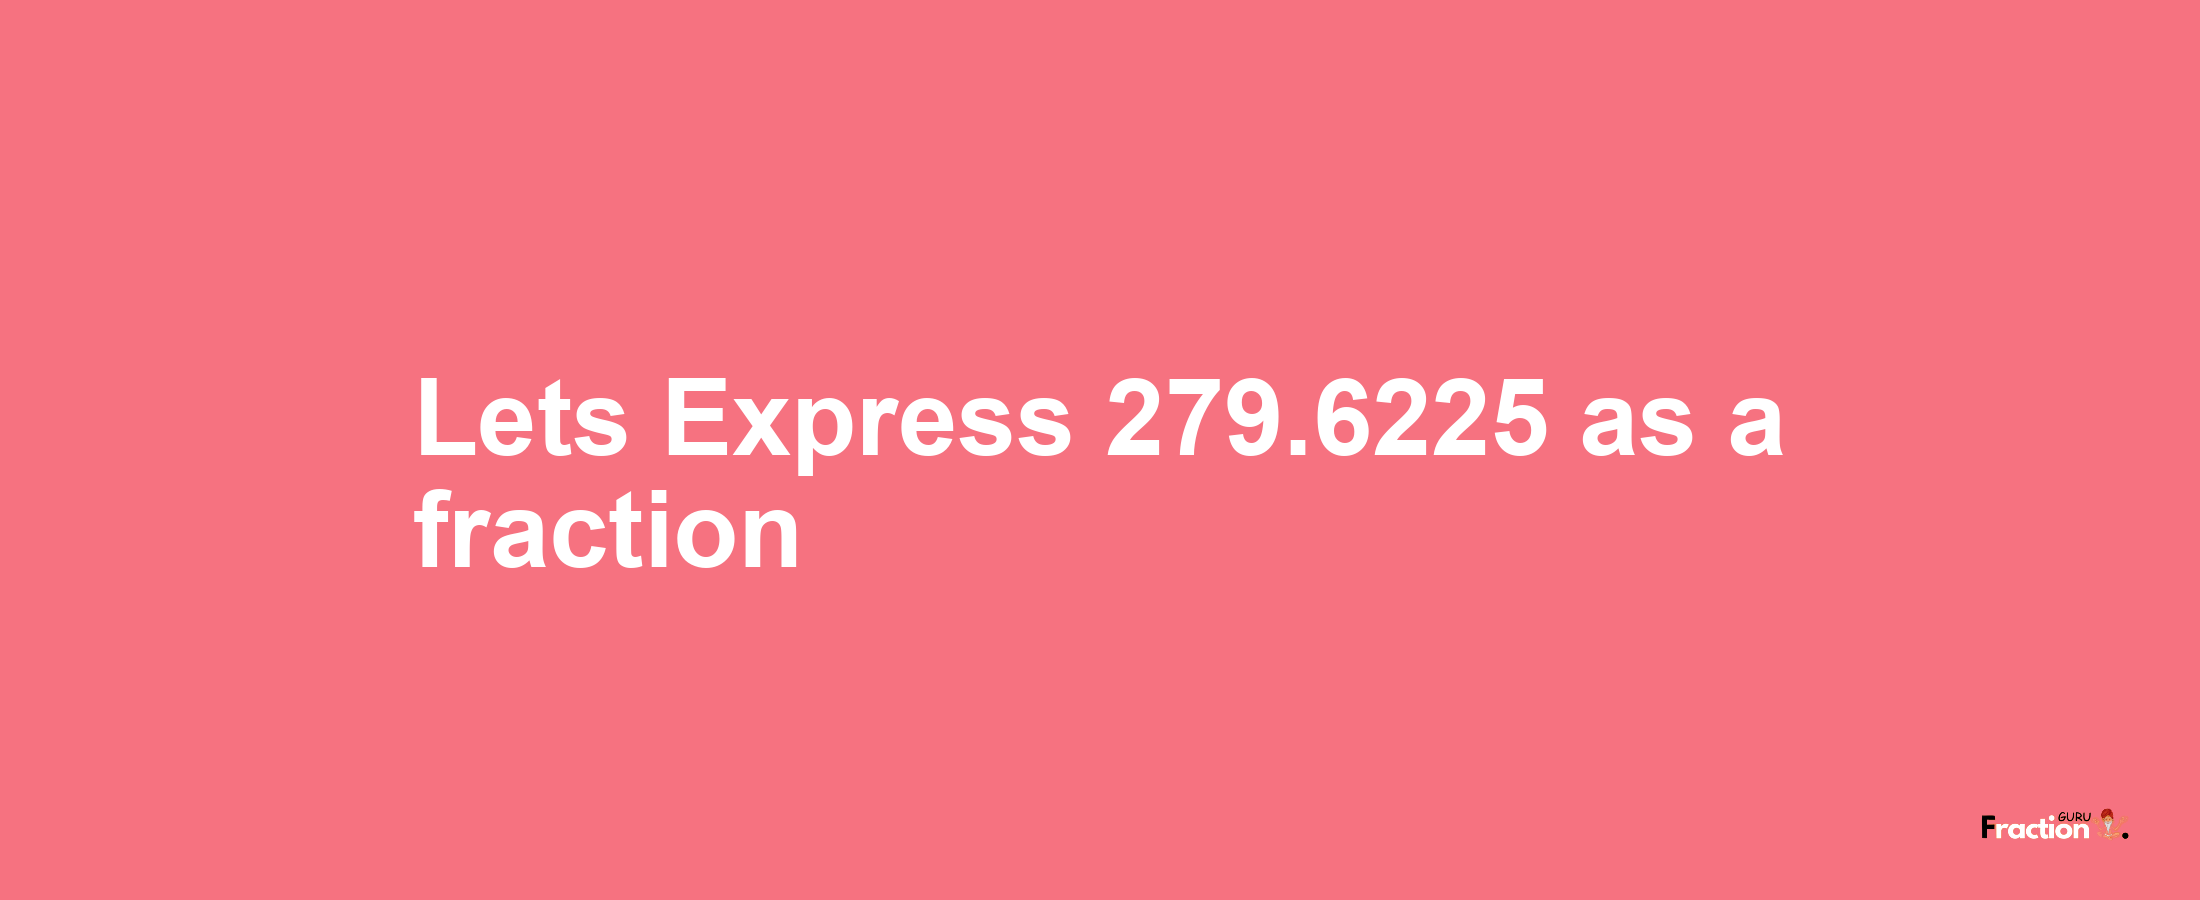 Lets Express 279.6225 as afraction